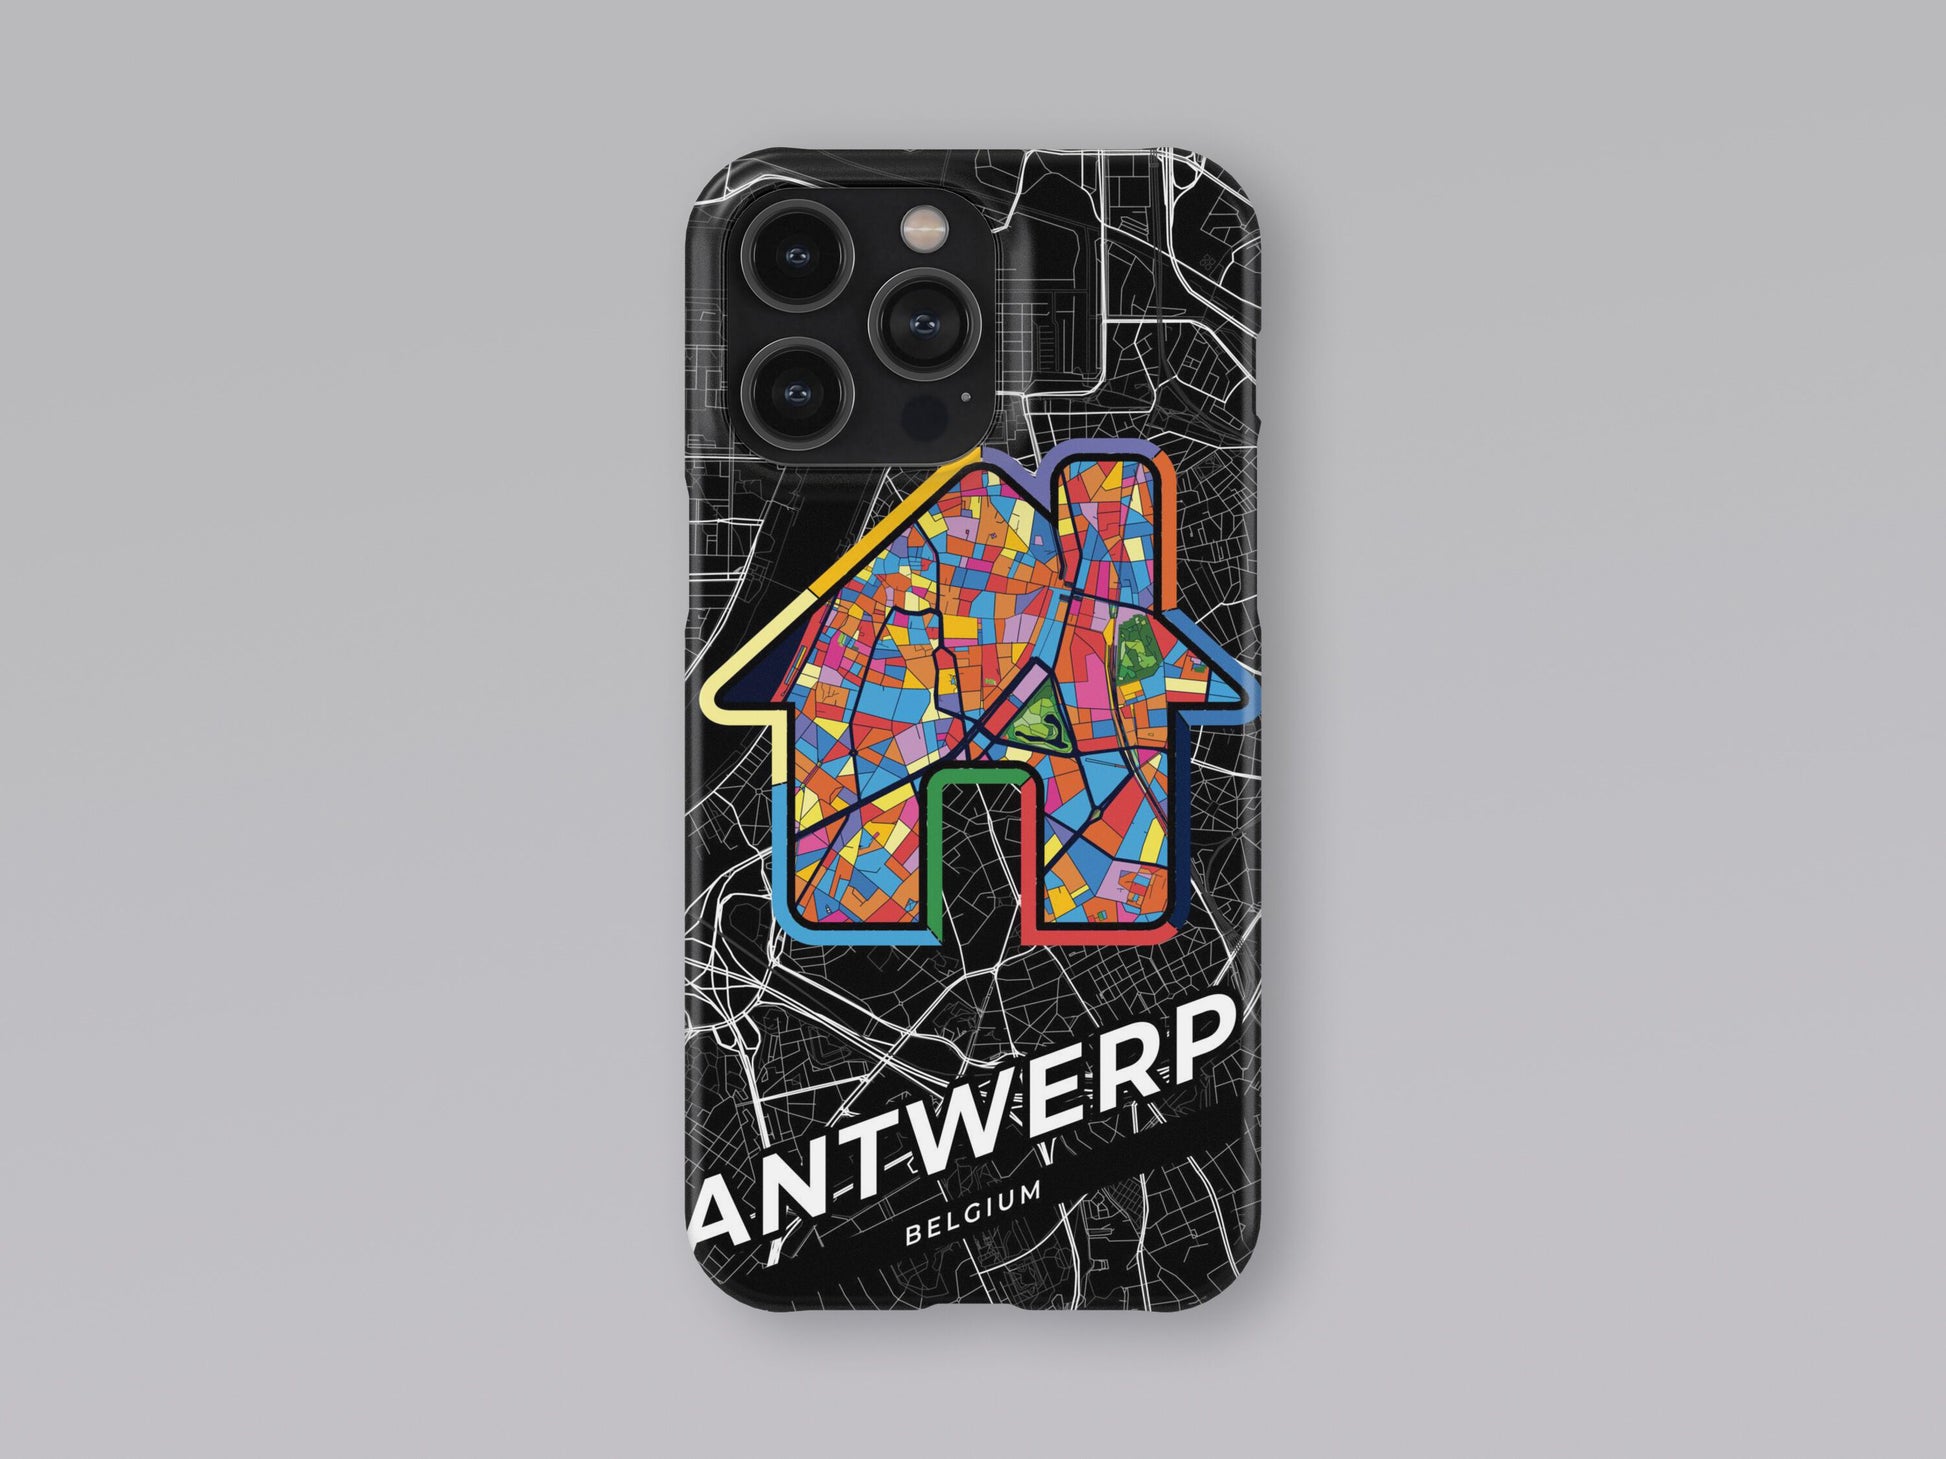 Antwerp Belgium slim phone case with colorful icon. Birthday, wedding or housewarming gift. Couple match cases. 3